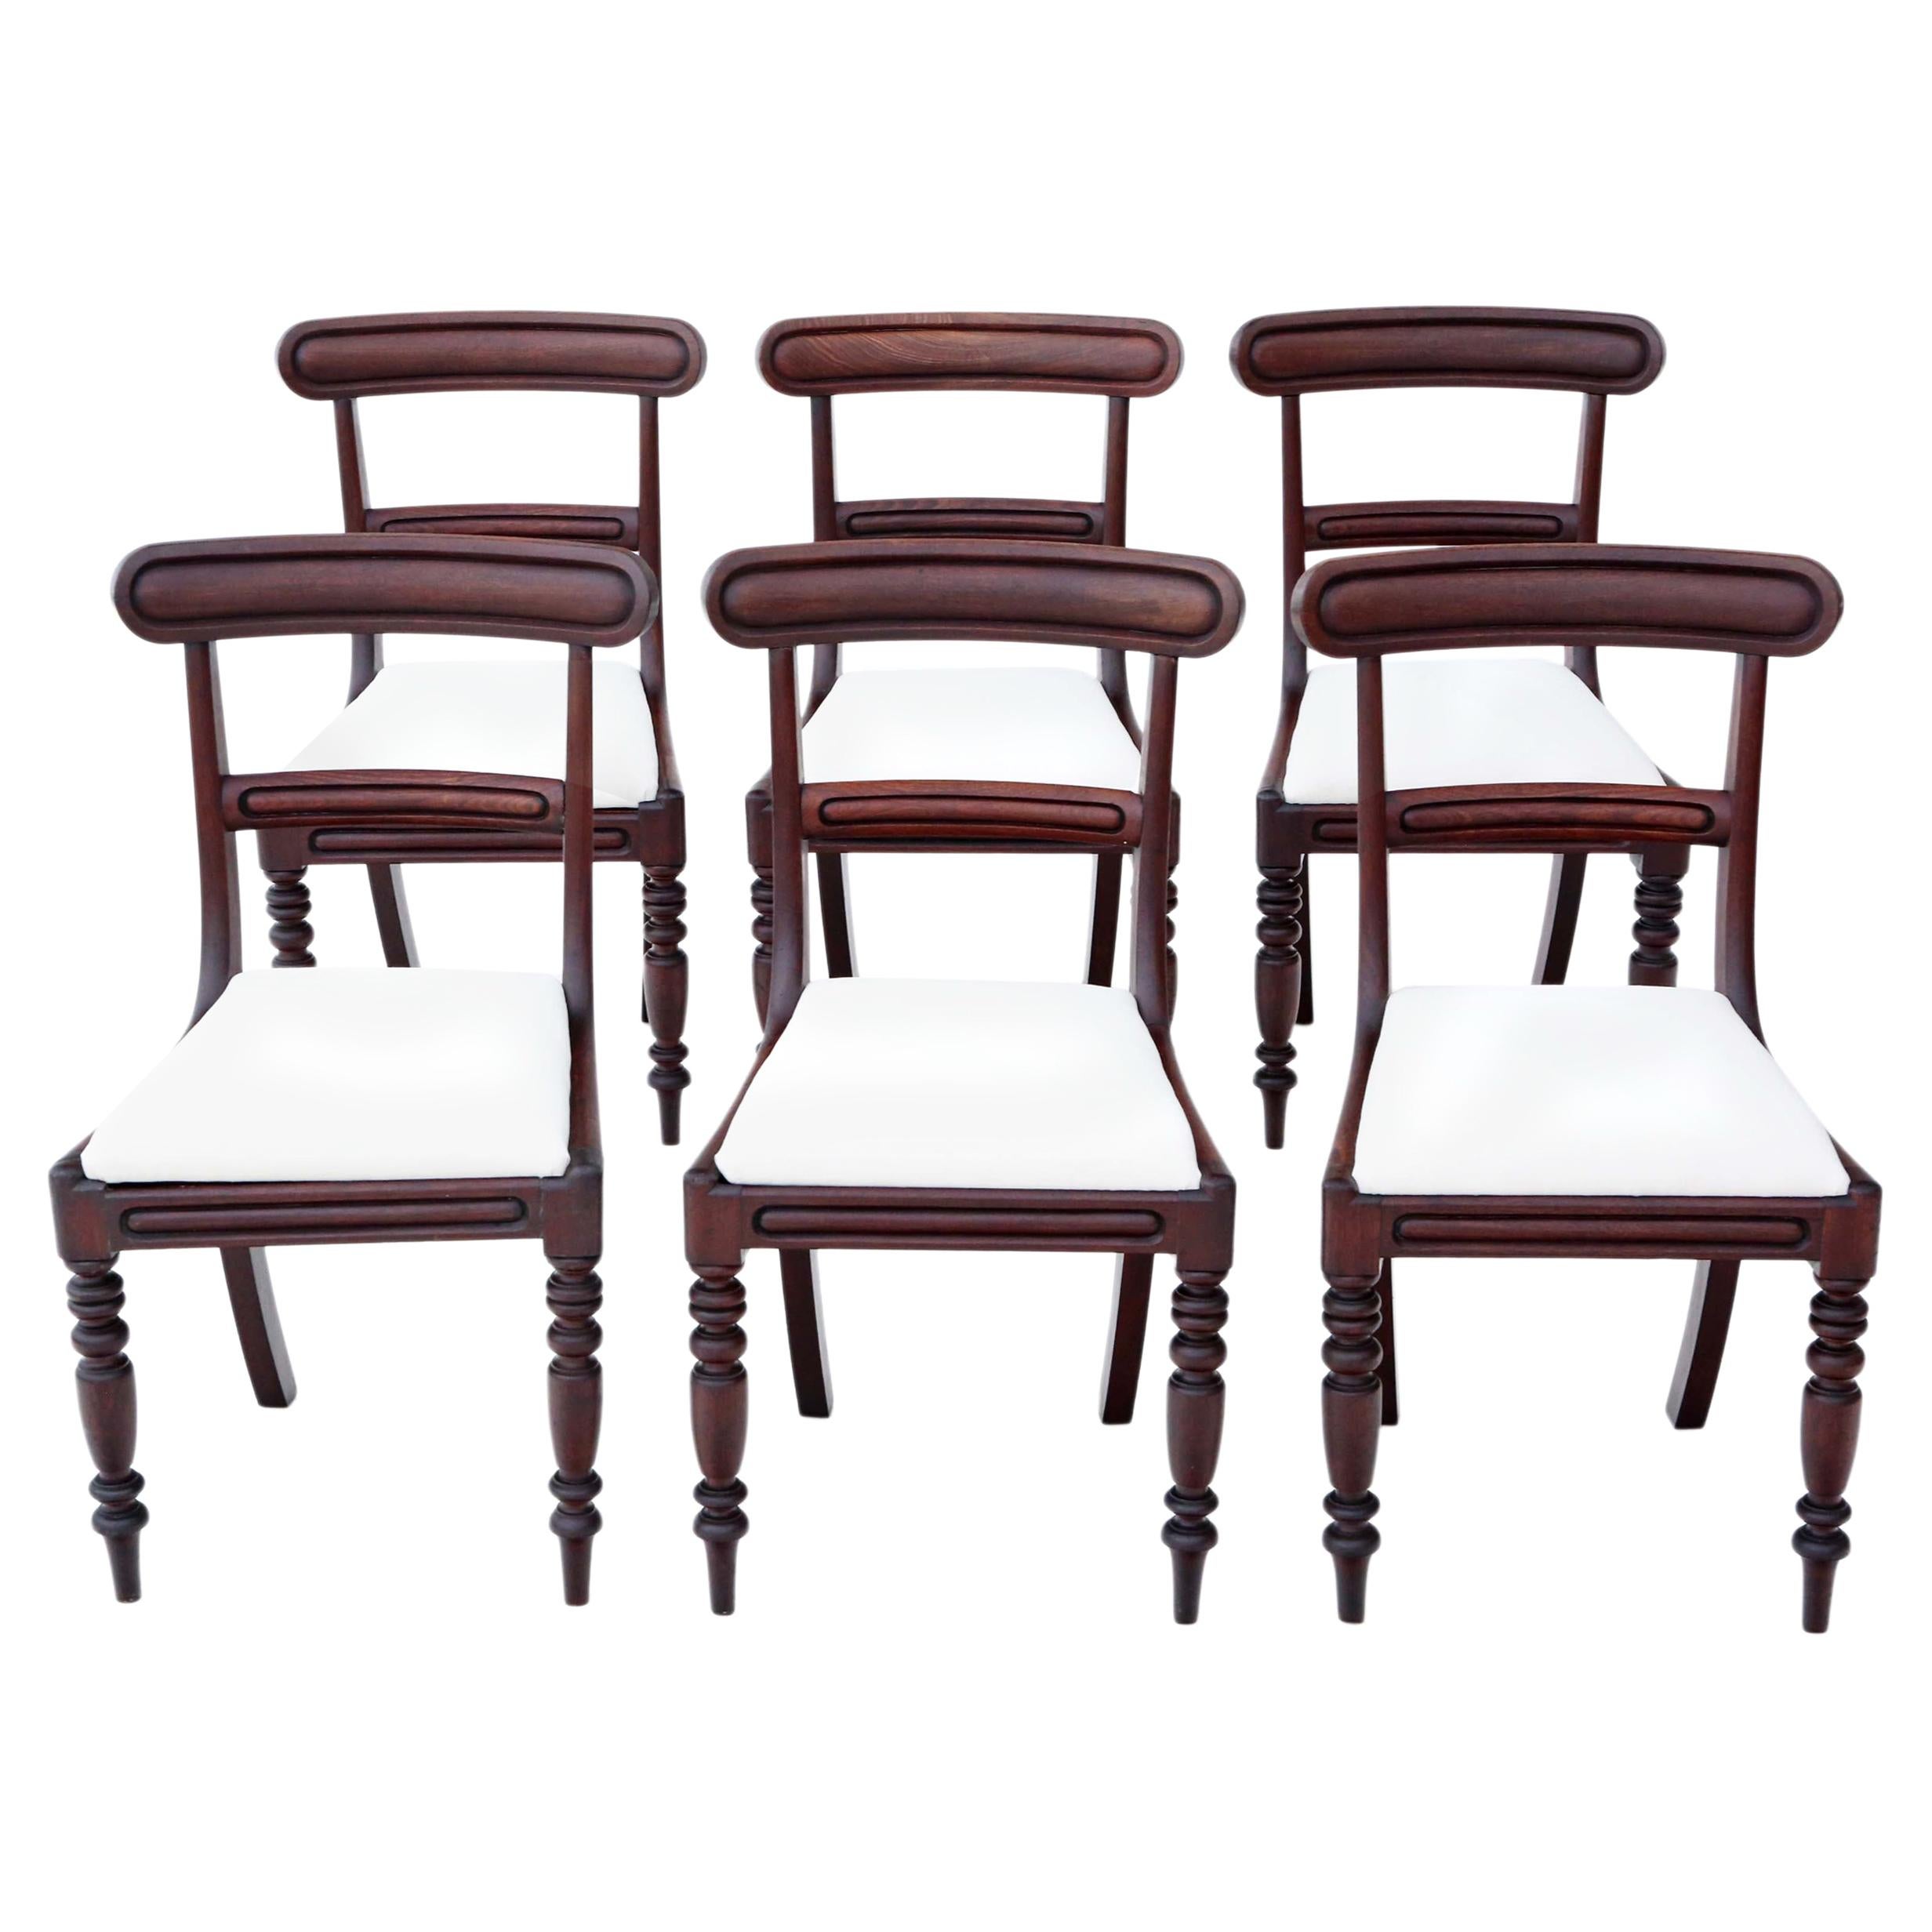 Antique circa 1850 Set of 6 Victorian Mahogany Dining Chairs